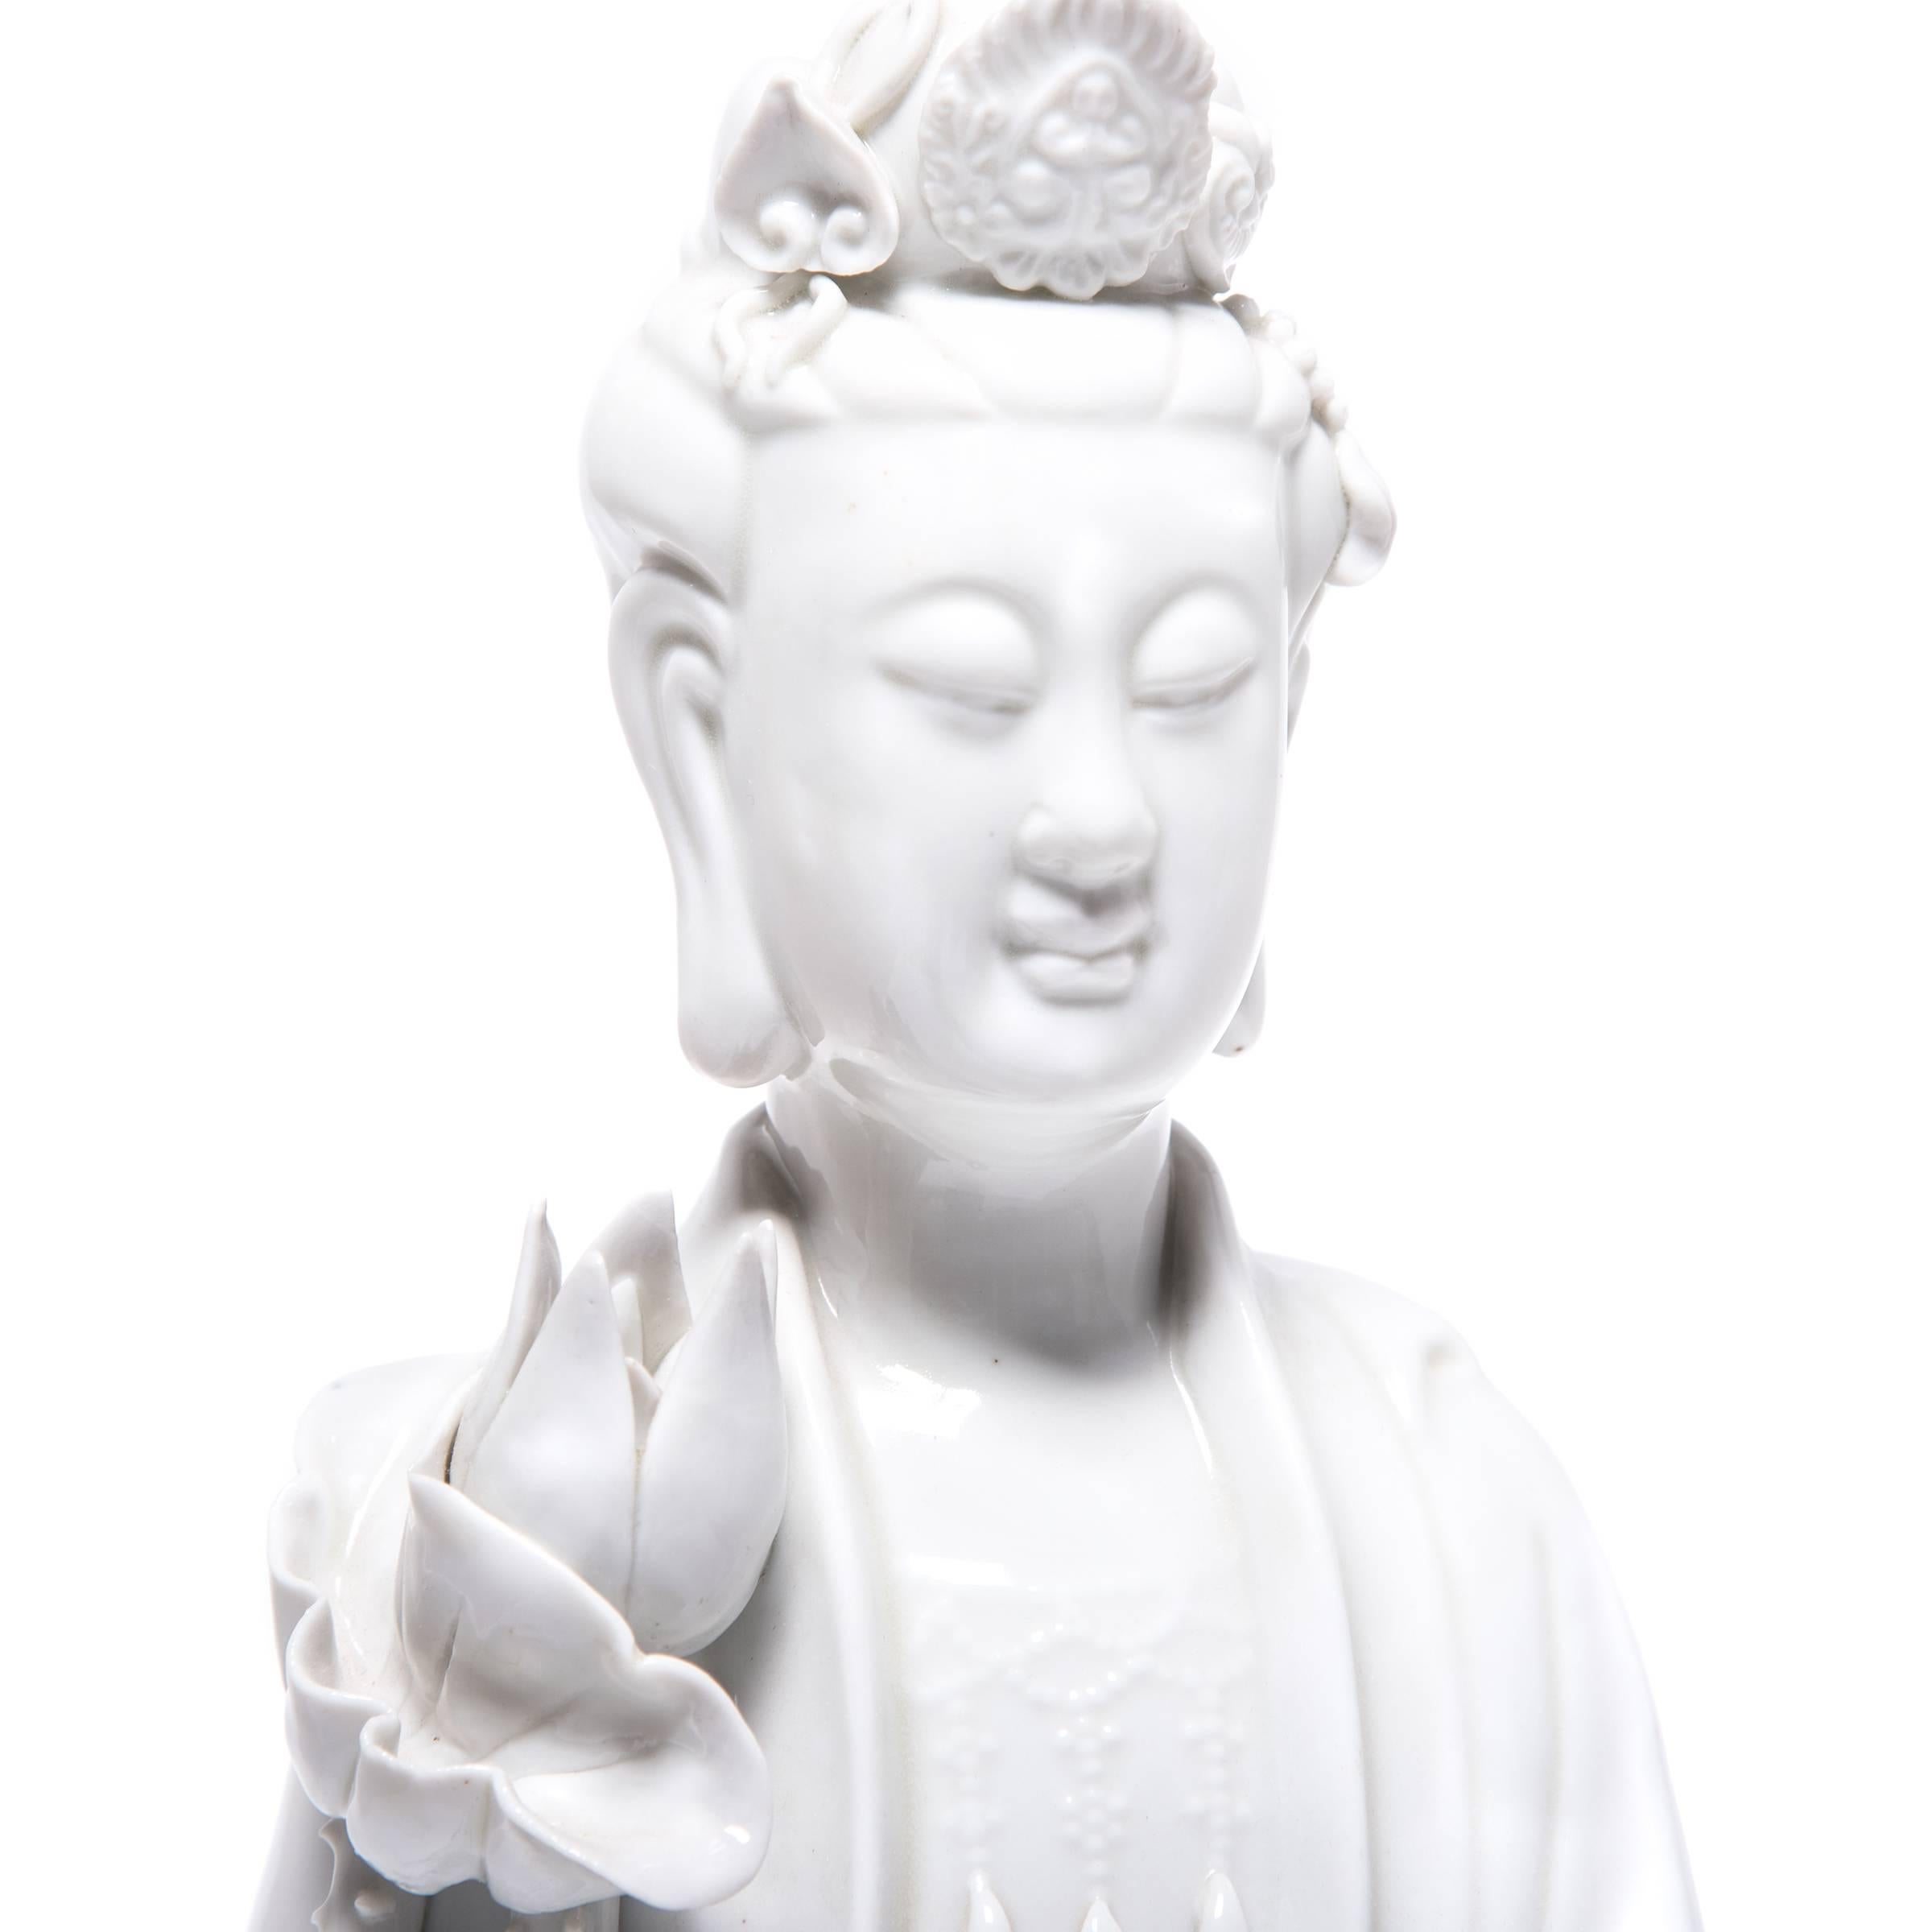 A symbol of compassion and wisdom, Guan Yin is a bodhisattva venerated by Buddhists and Taoists alike. This exquisite porcelain sculpture from circa 1900 depicts the serene-faced goddess holding lotus plants, symbols of purity and divinity, in her